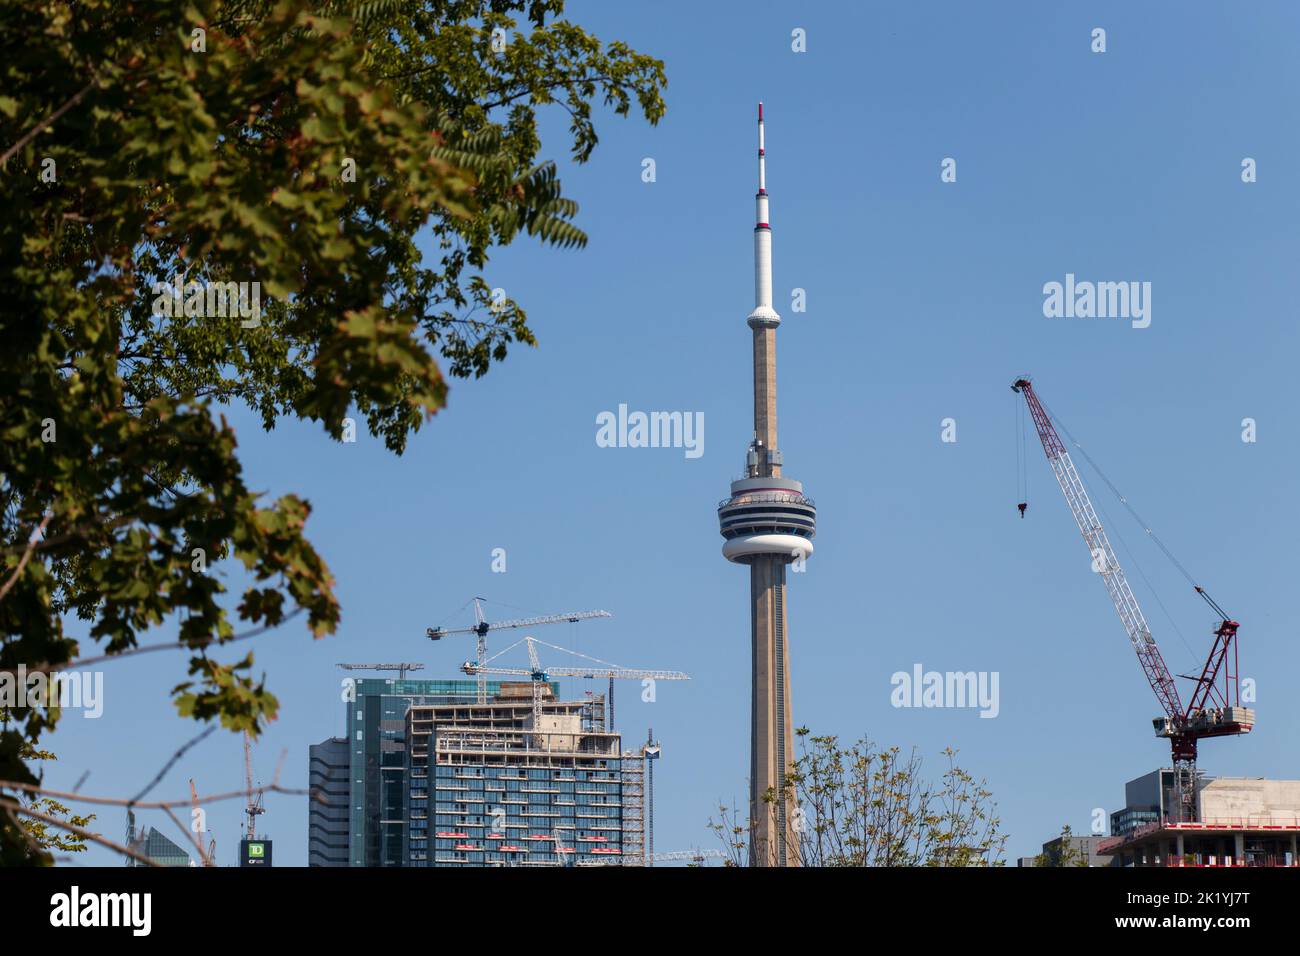 The CN Tower is seen on a clear day; under construction condos and cranes are seen around the famous landmark. Stock Photo